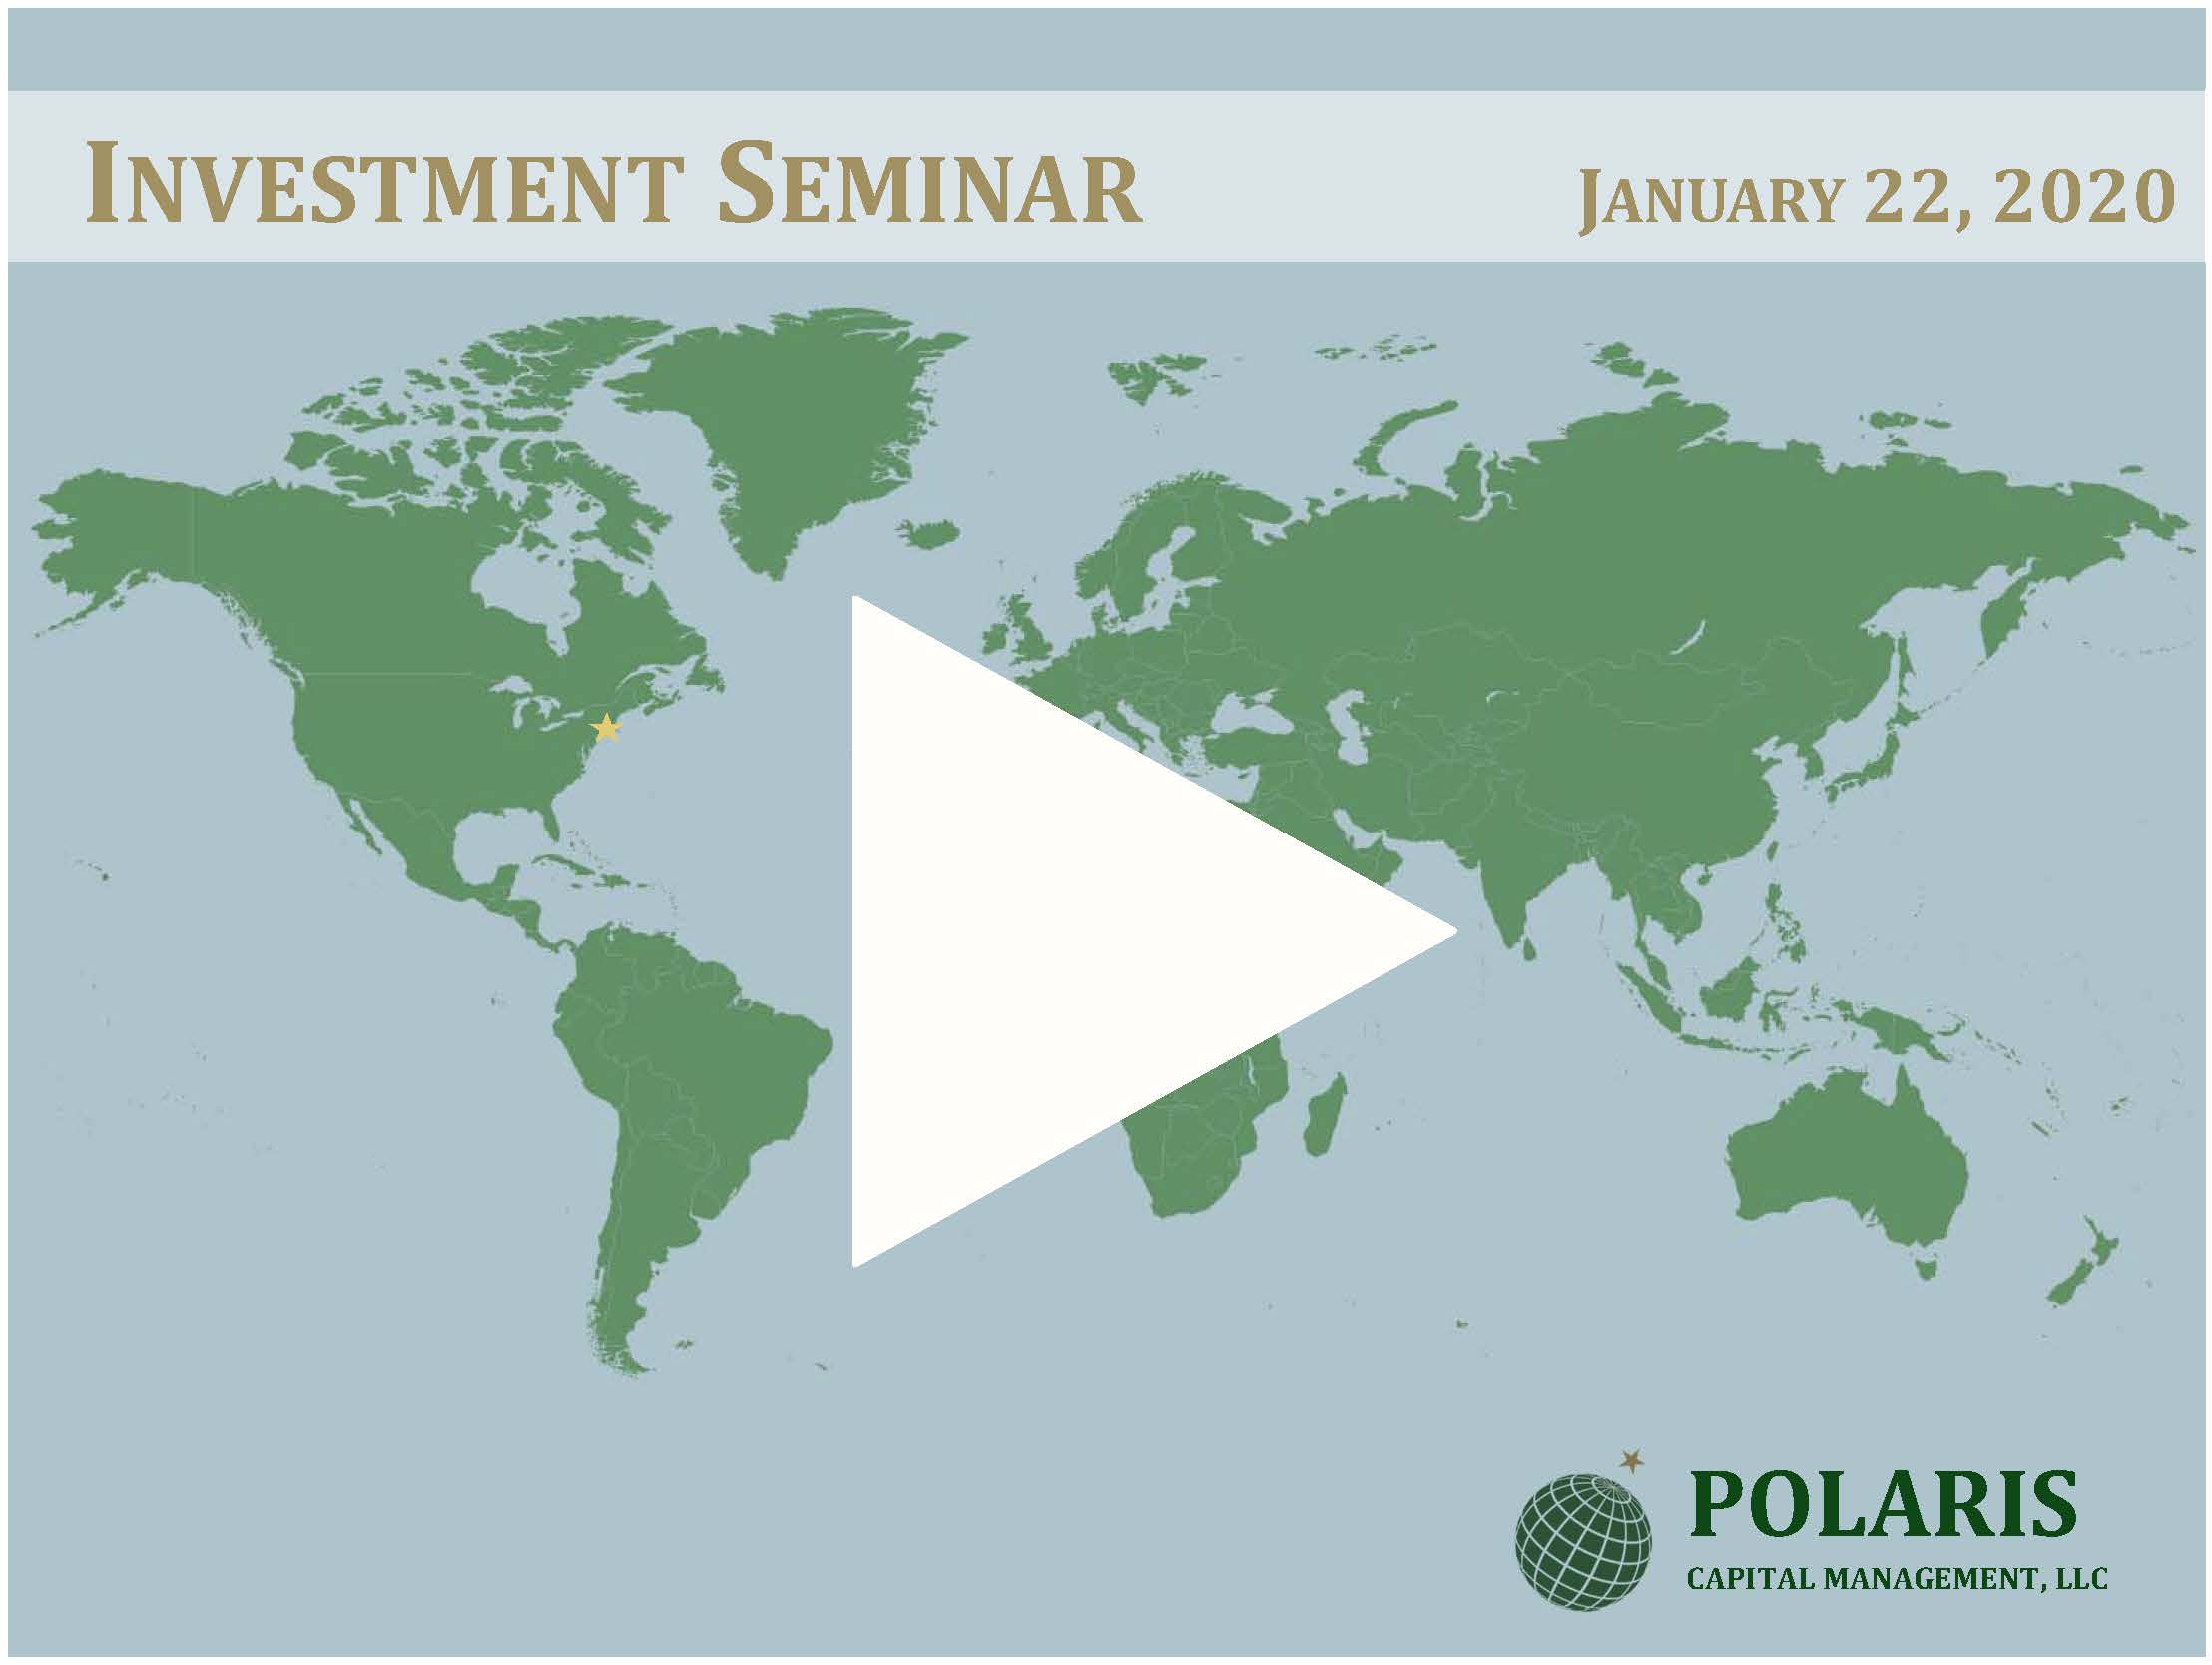 Click here to watch our 2020 Polaris Investment Seminar